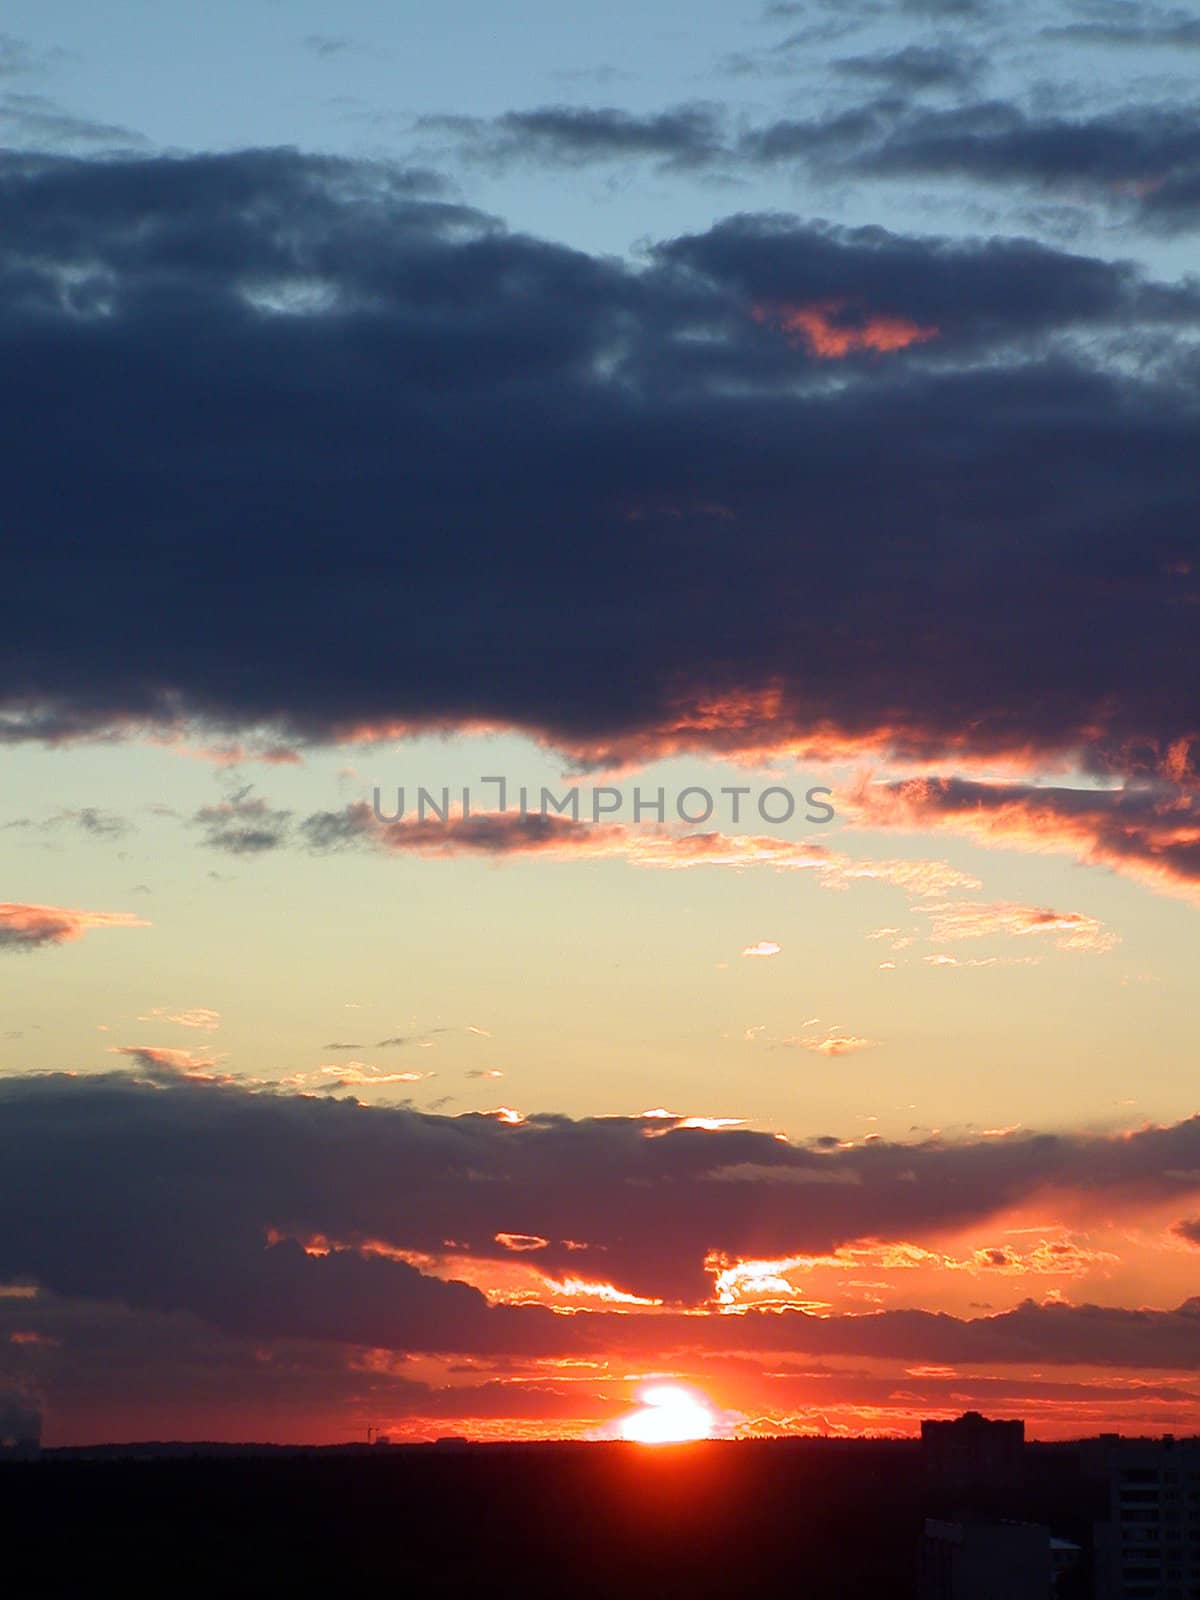 The sundown, nature, sky and  clouds, landscape